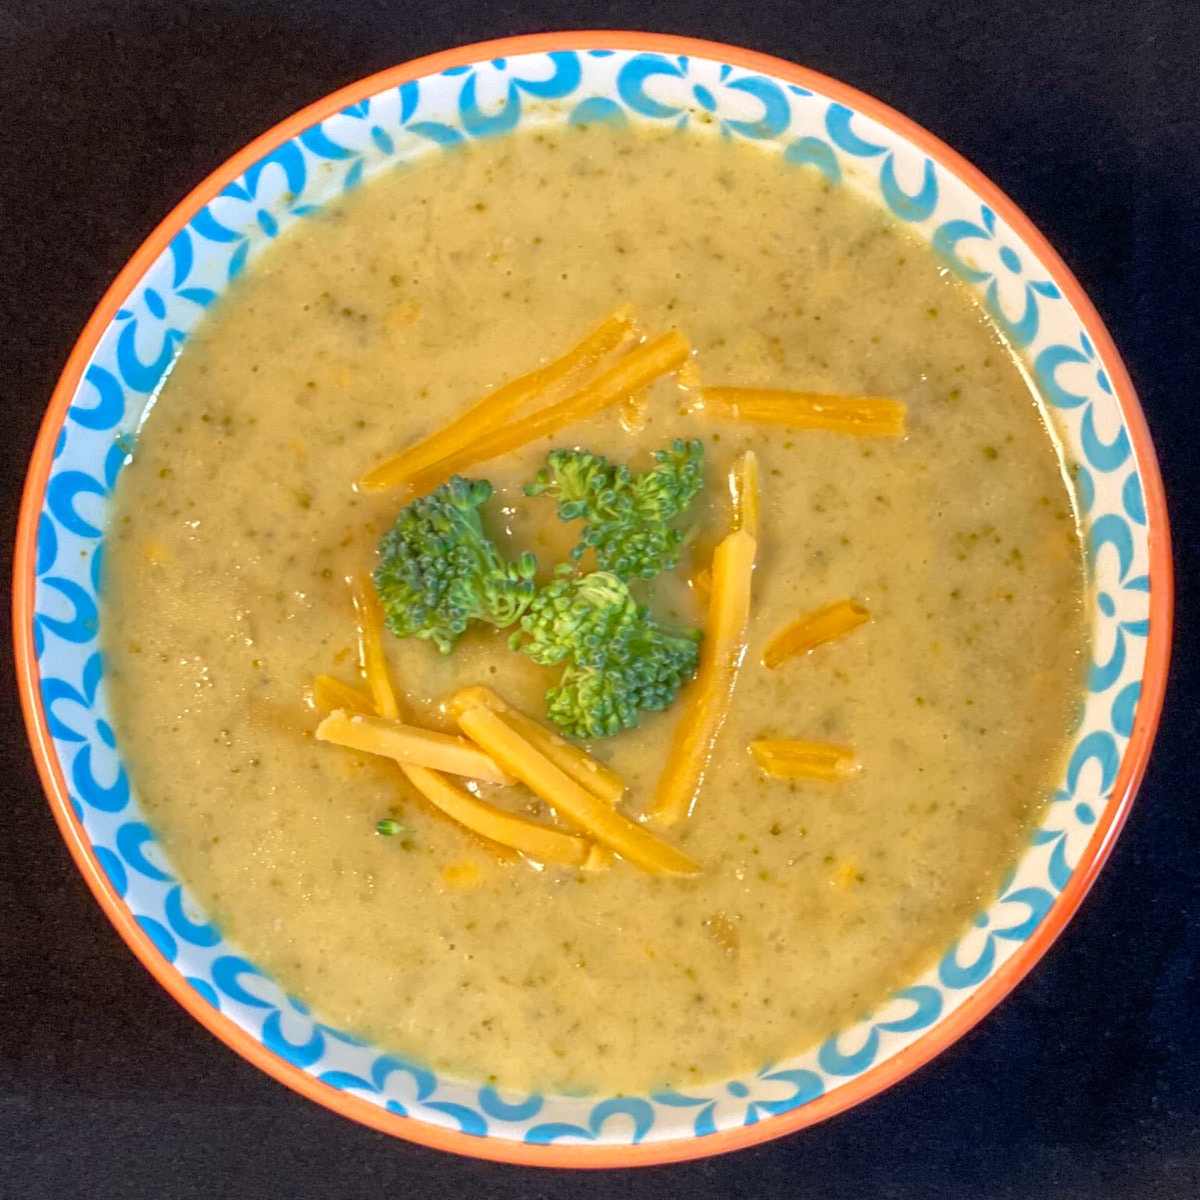 Top down view of bowl of broccoli cheddar soup with fresh broccoli and cheese shreds floating on top